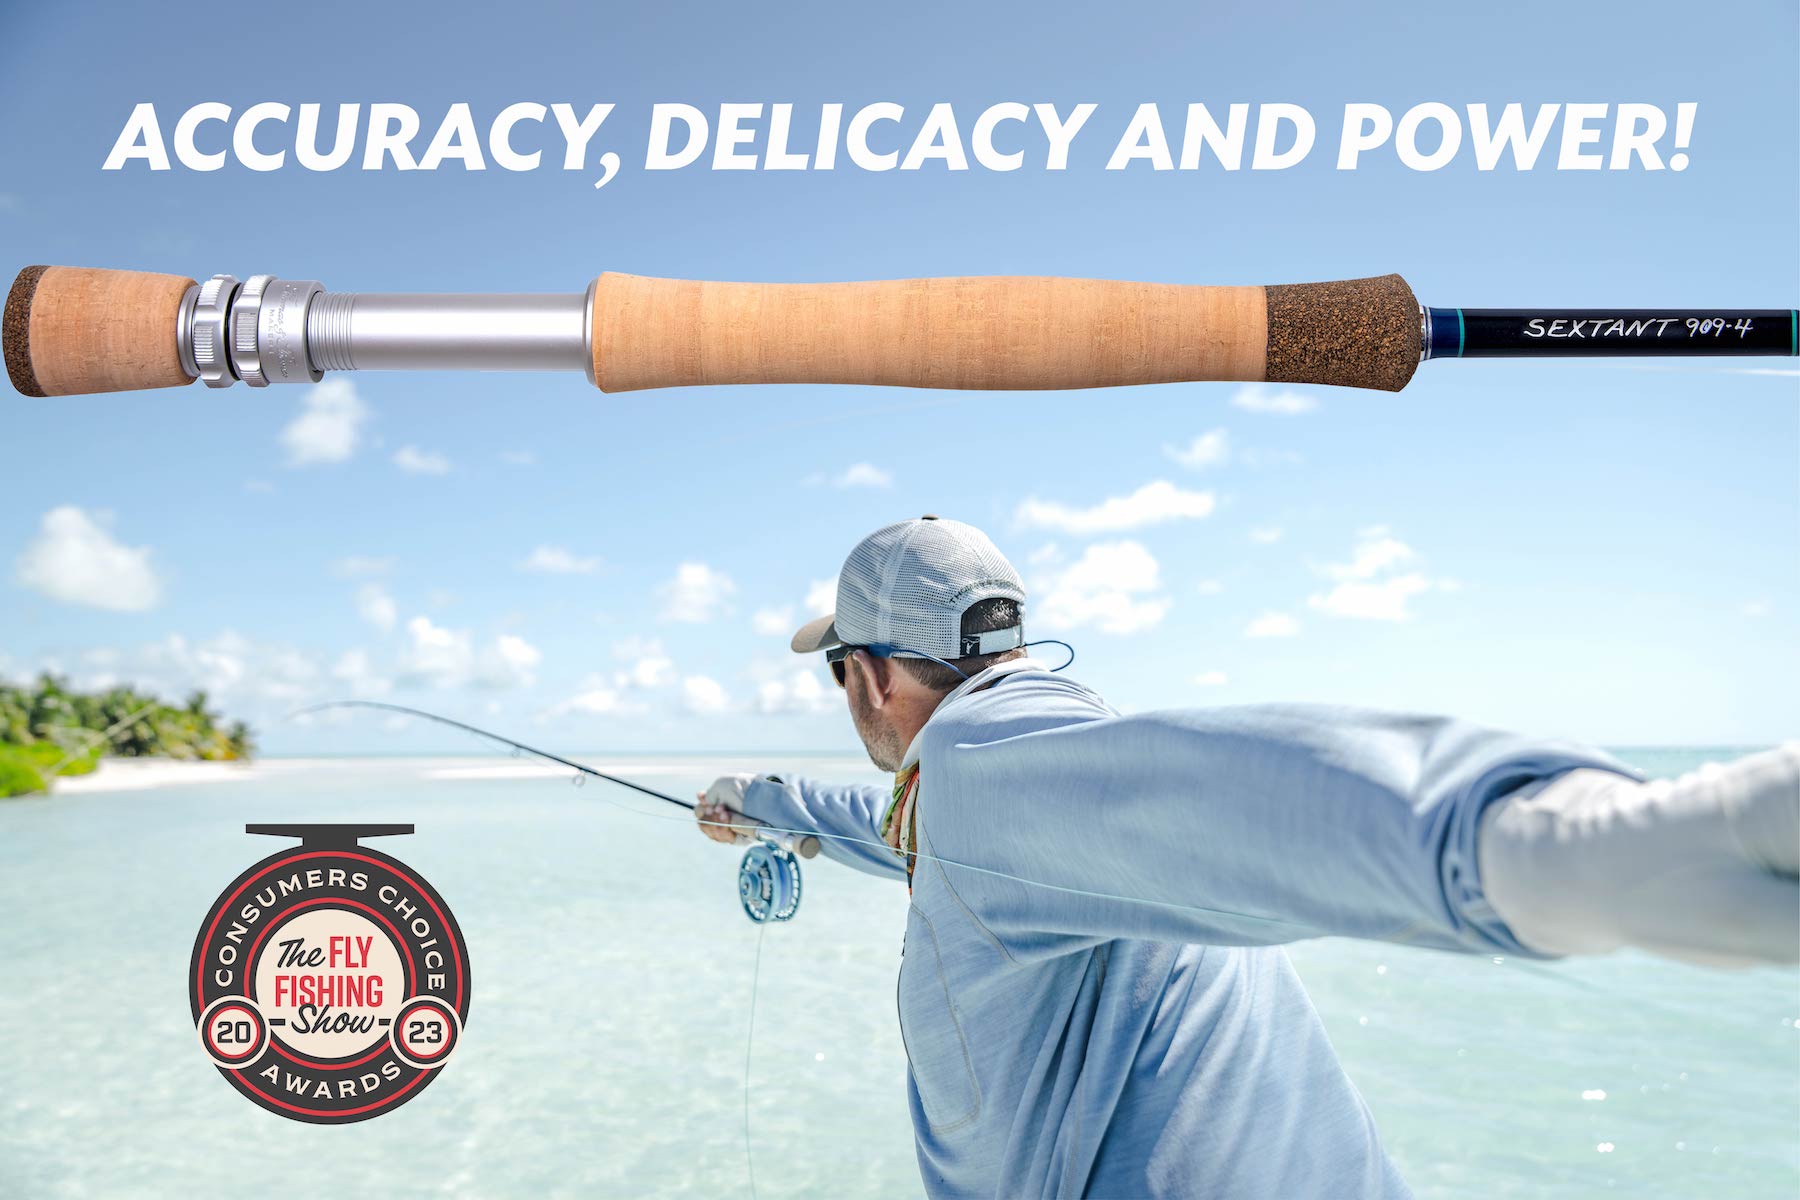 6 wt saltwater rod recommendations  The North American Fly Fishing Forum -  sponsored by Thomas Turner